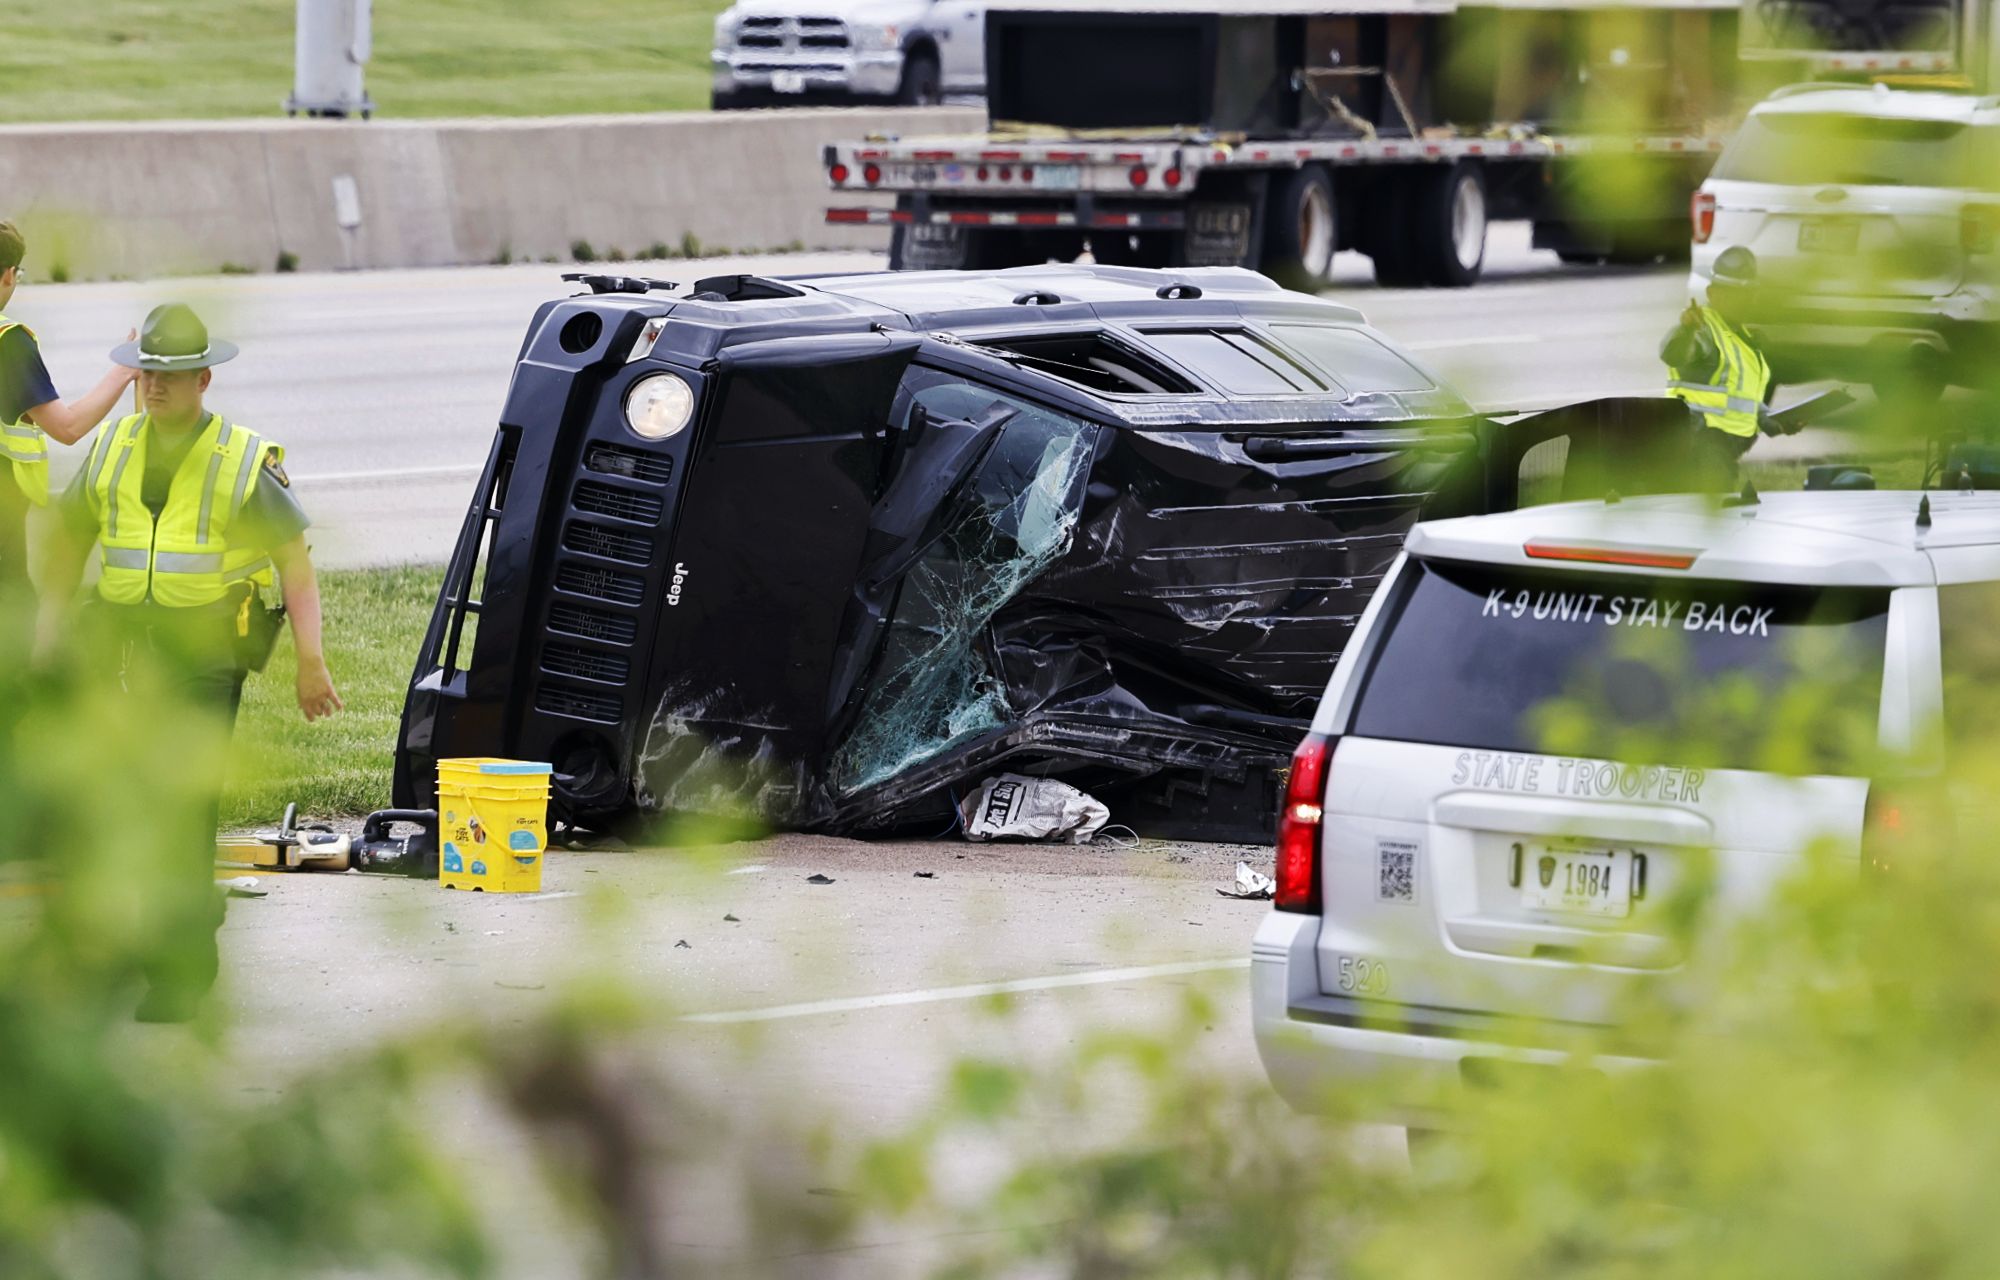 2 injured in 2-vehicle rollover crash on ramp to SR 63 from I-75N – Hamilton Journal News